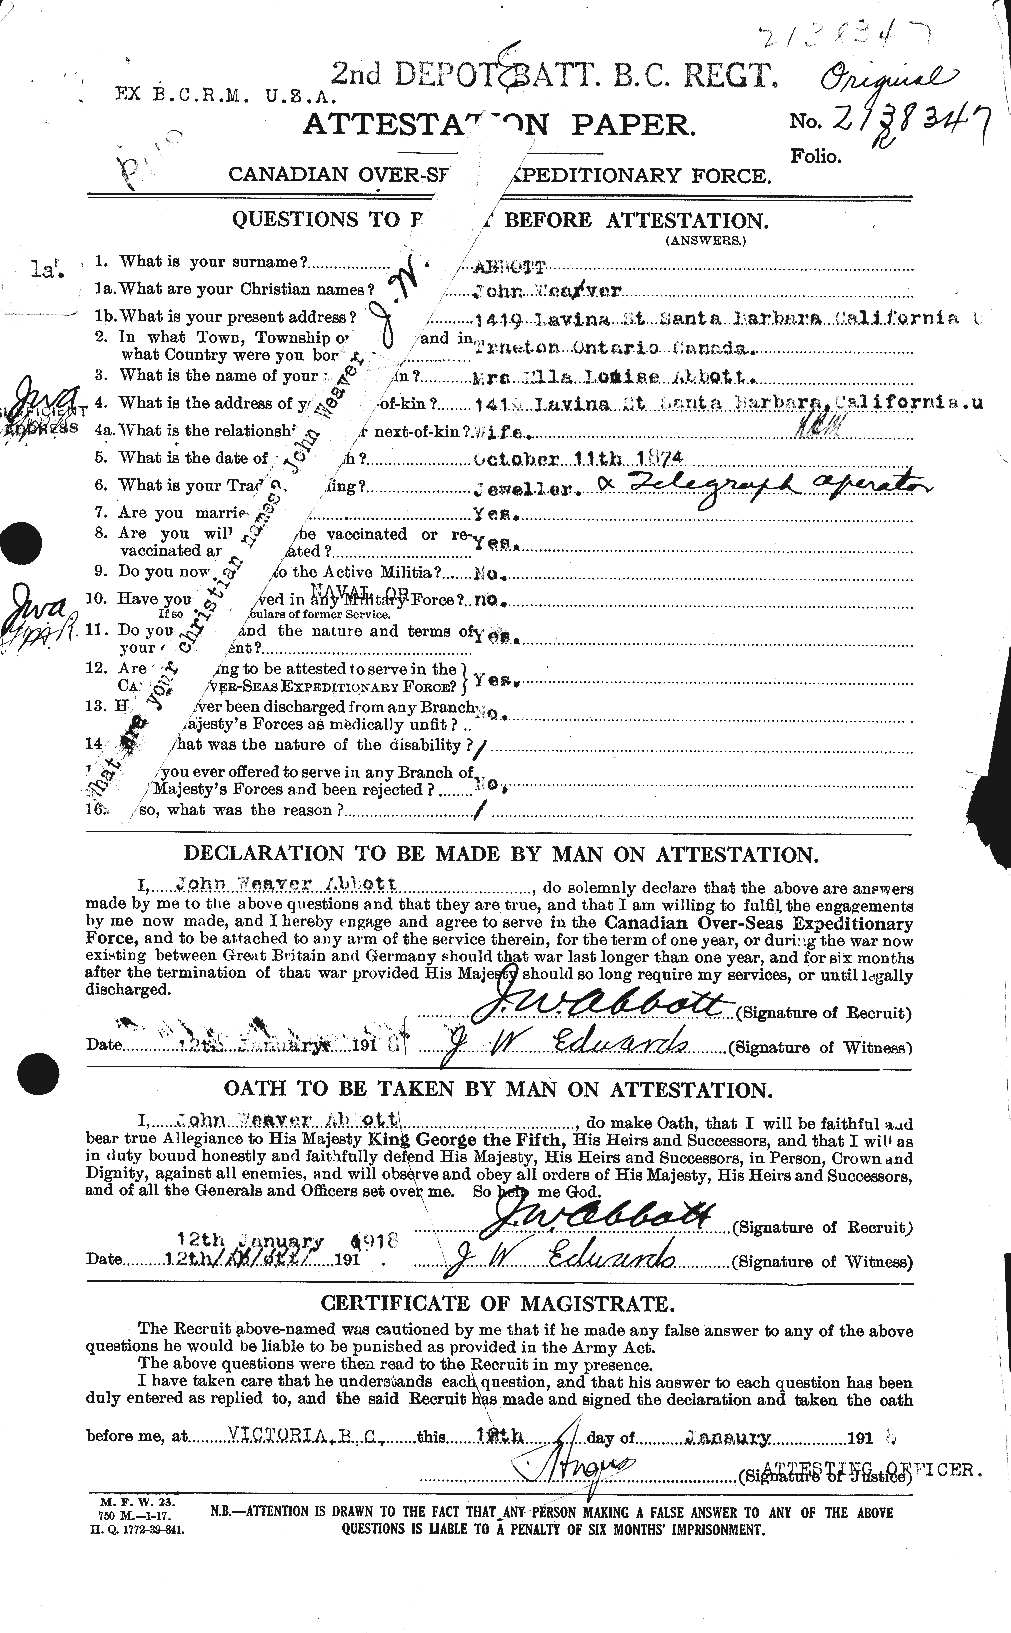 Personnel Records of the First World War - CEF 200999a